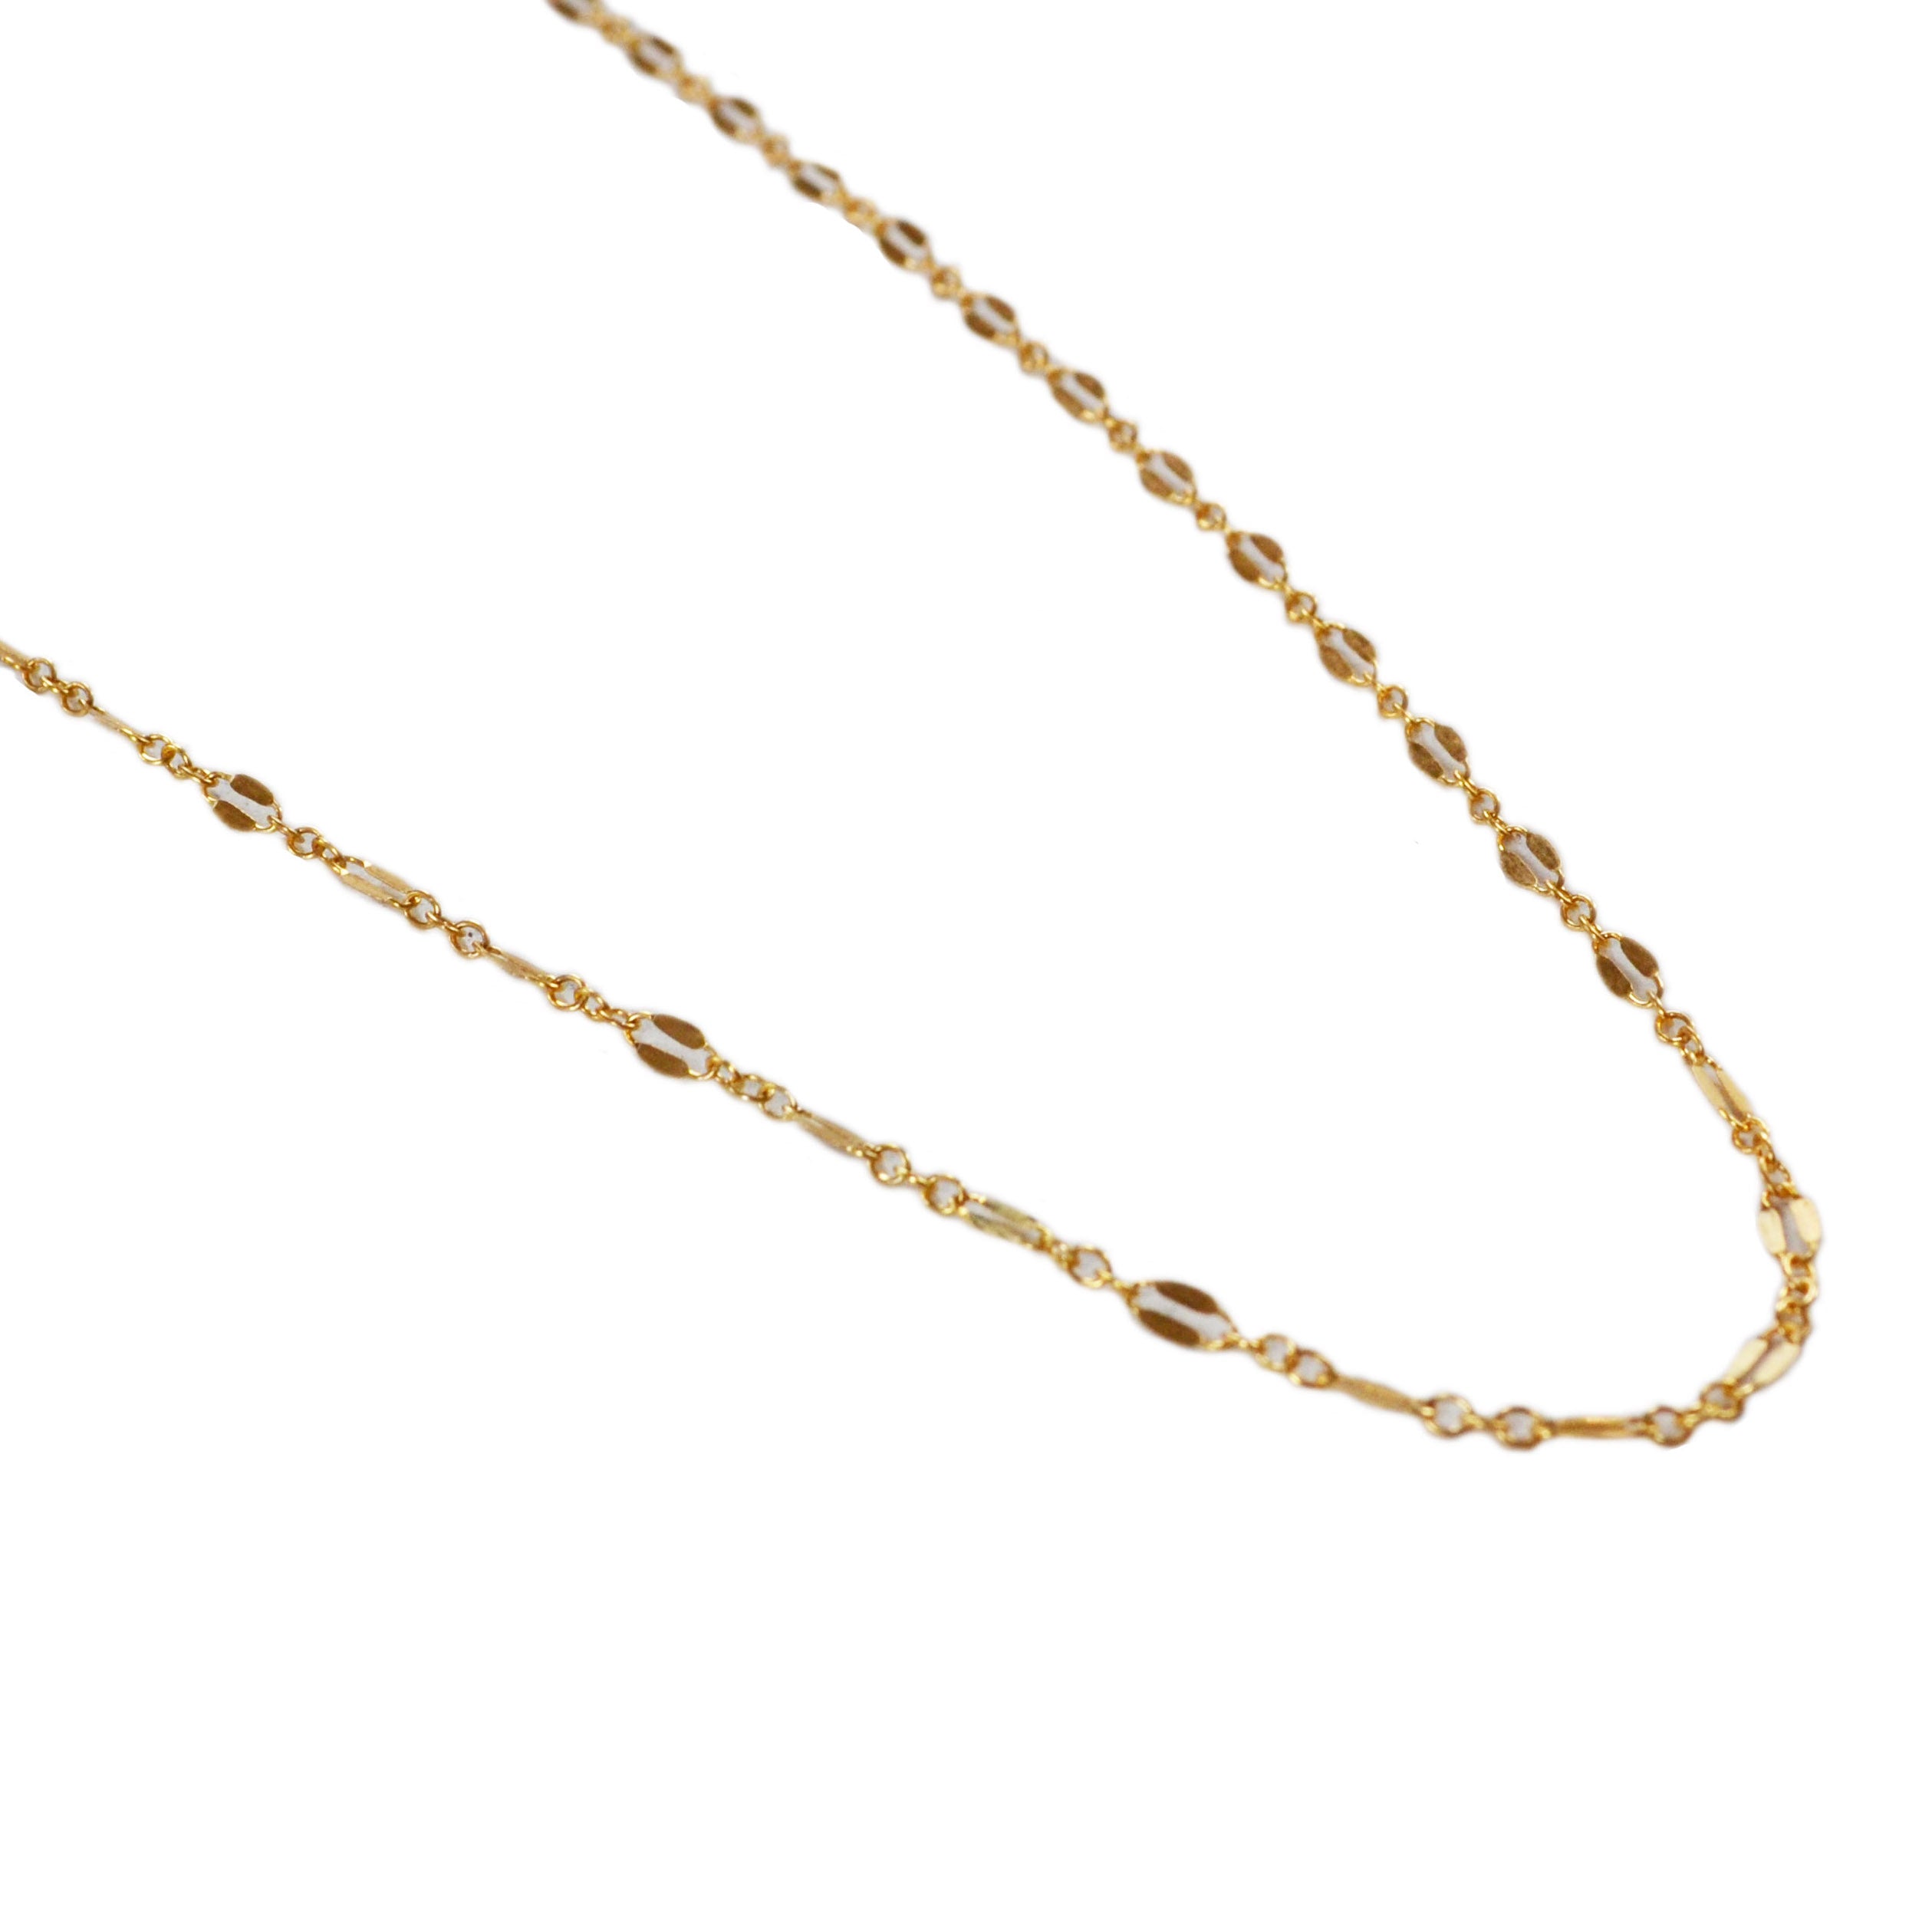 Necklace or Bracelet Extender in 14K Gold Plate, 14K Rose Gold Plate or  Silver Rhodium Plated 1 1/4''. FREE DOMESTIC SHIPPING 